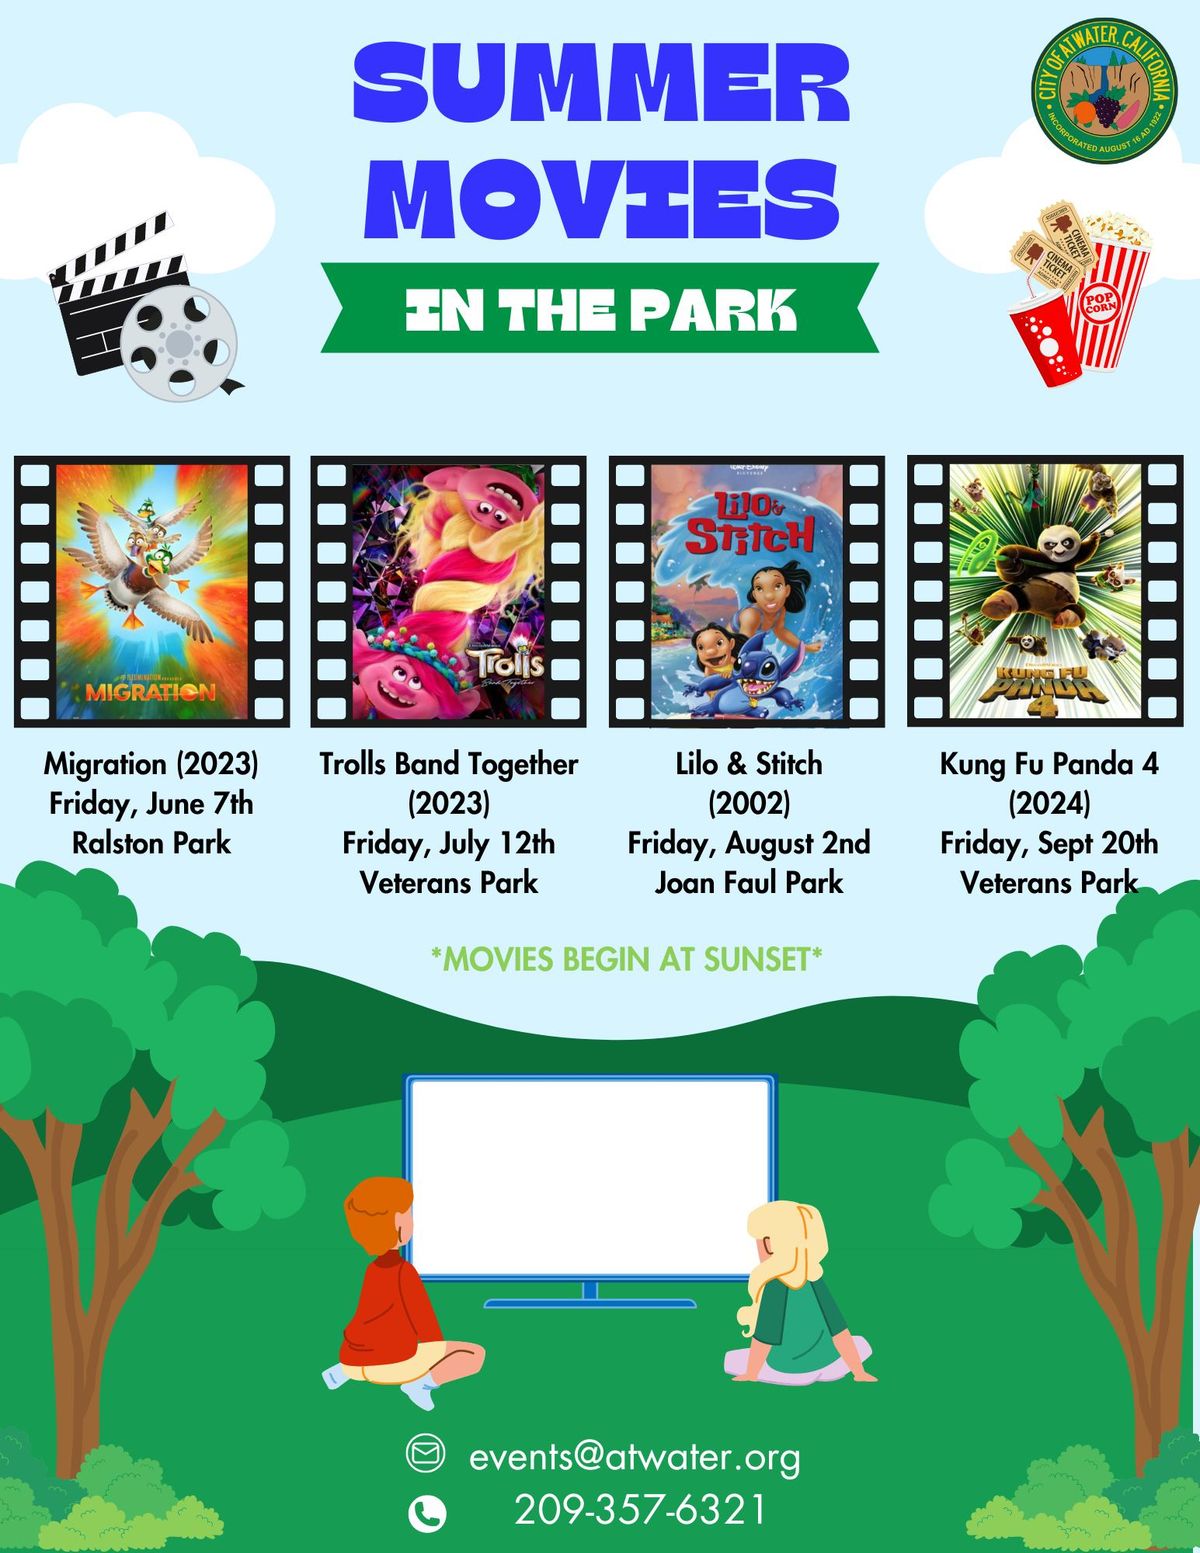 Movie in the Park (Kung Fu Panda 4)